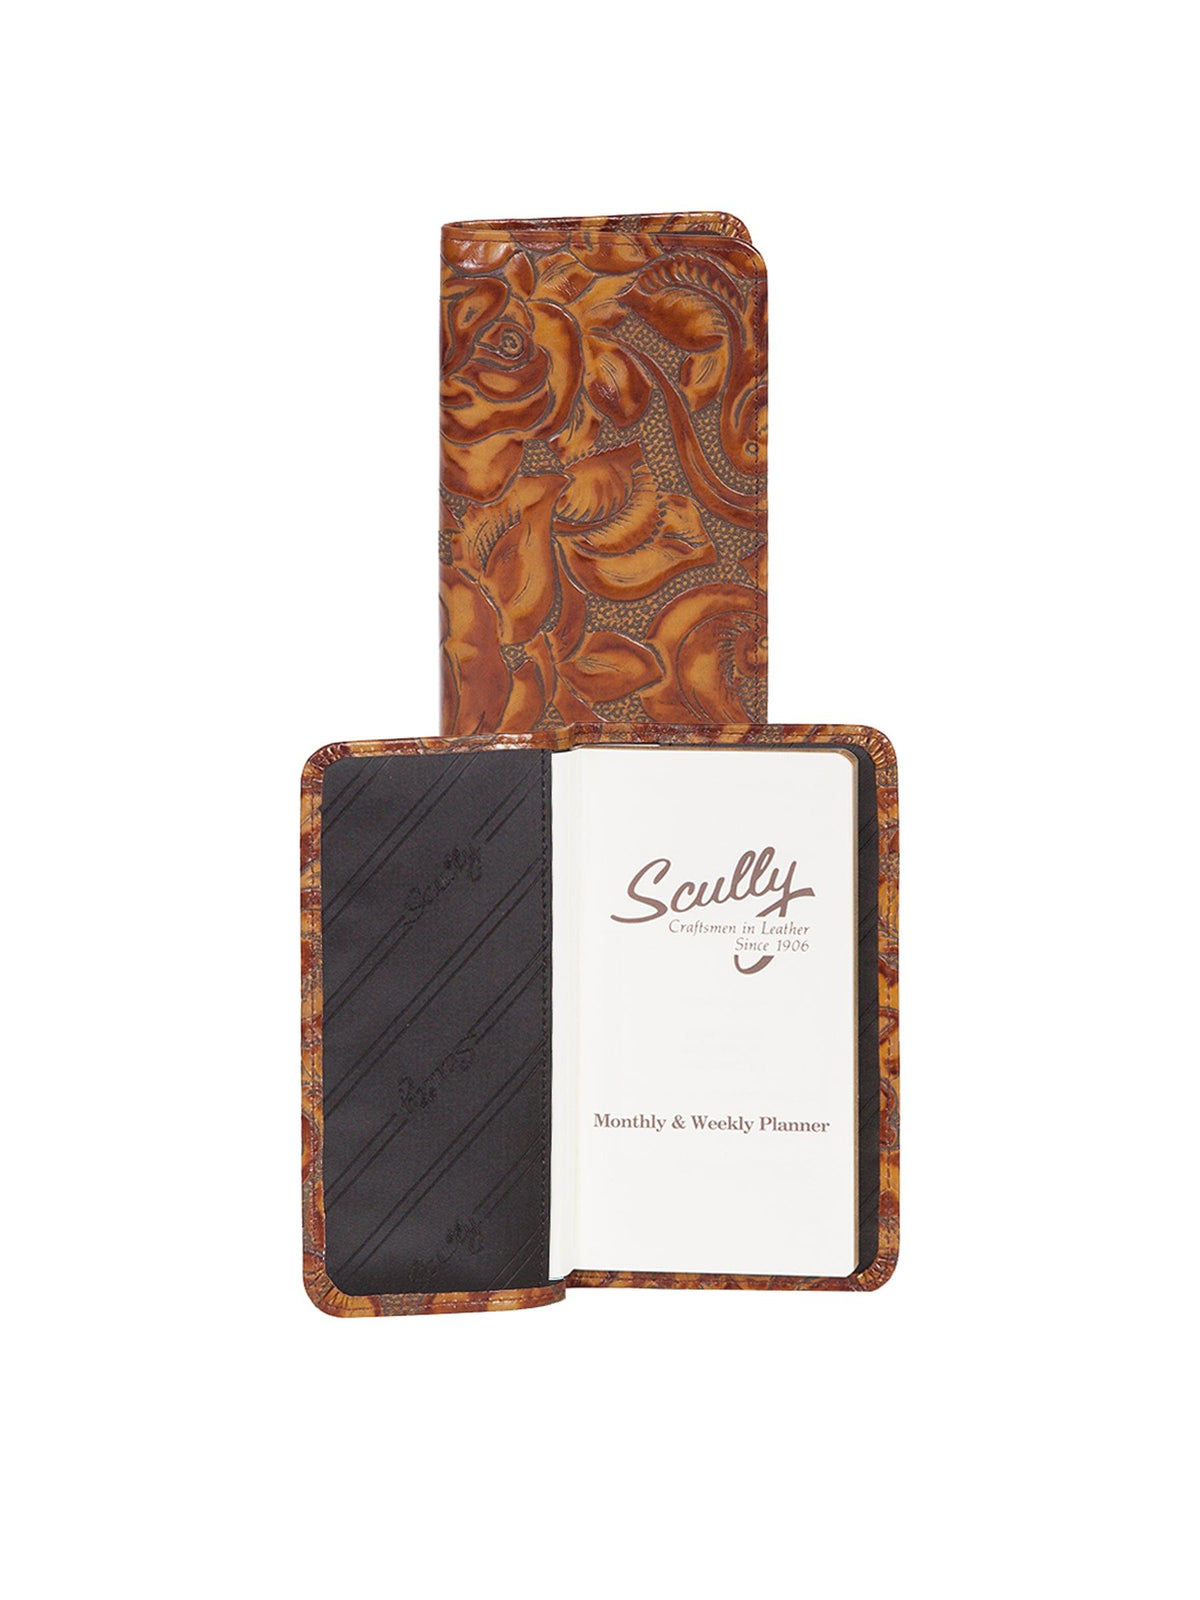 Scully Leather Chocolate New Tooled Leather Pocket Weekly Planner - Flyclothing LLC